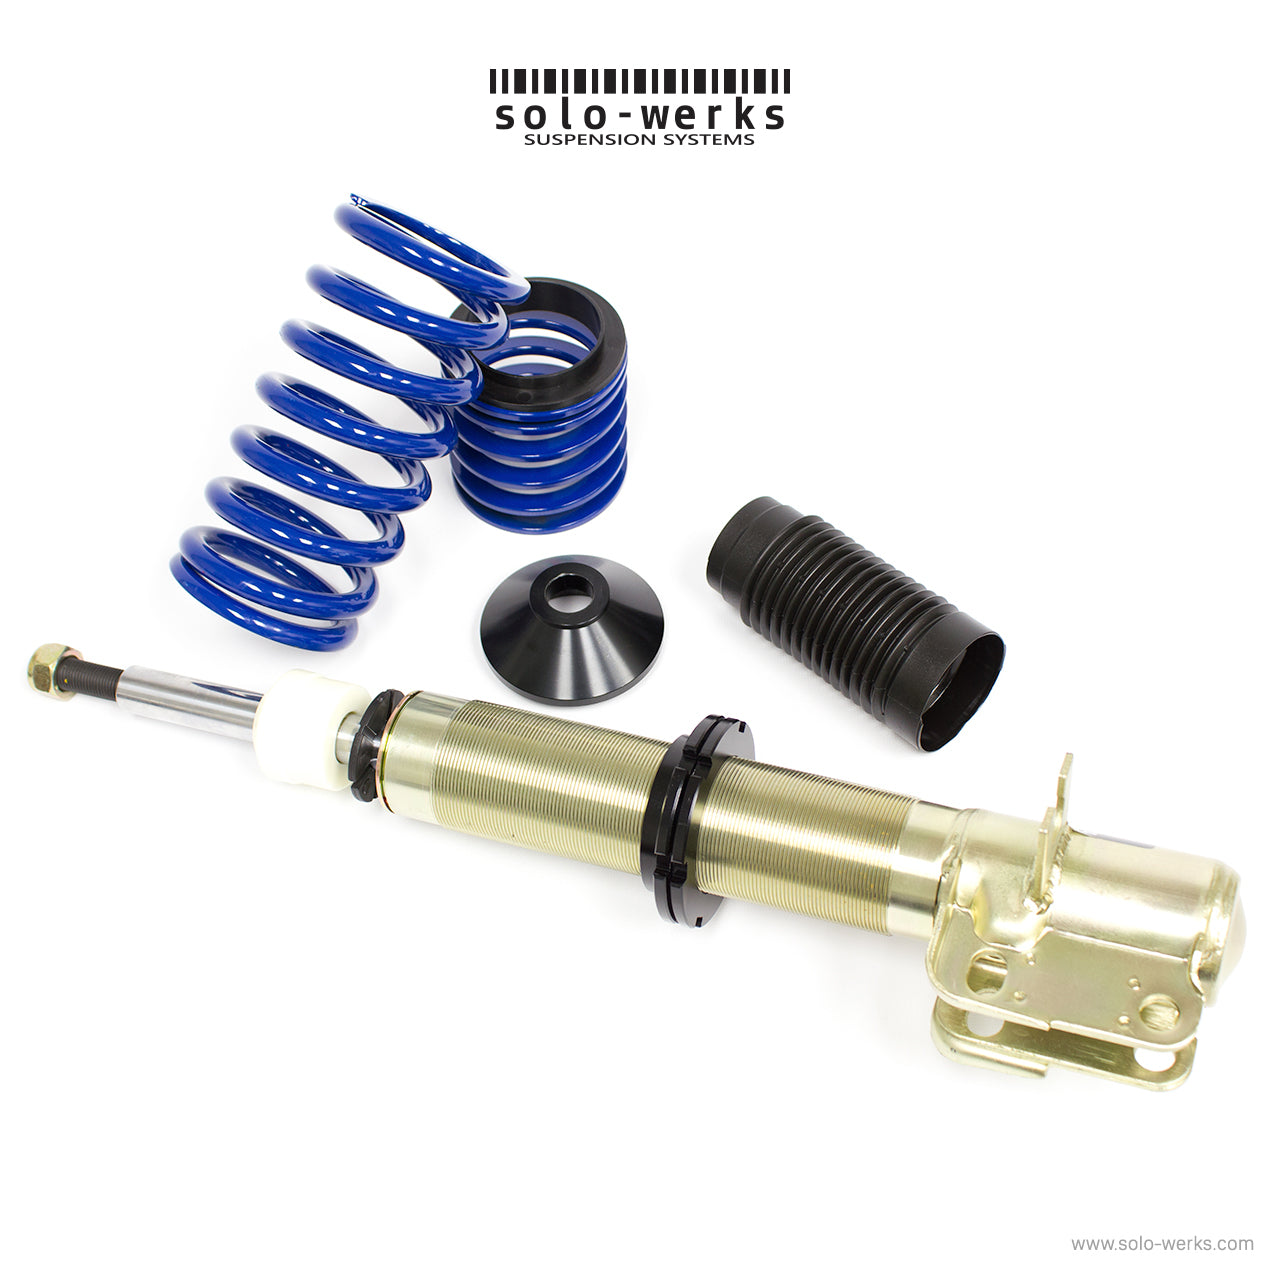 SOLO WERKS S1 COILOVER SYSTEM - VW '79-'84 MK1 CADDY PICKUP